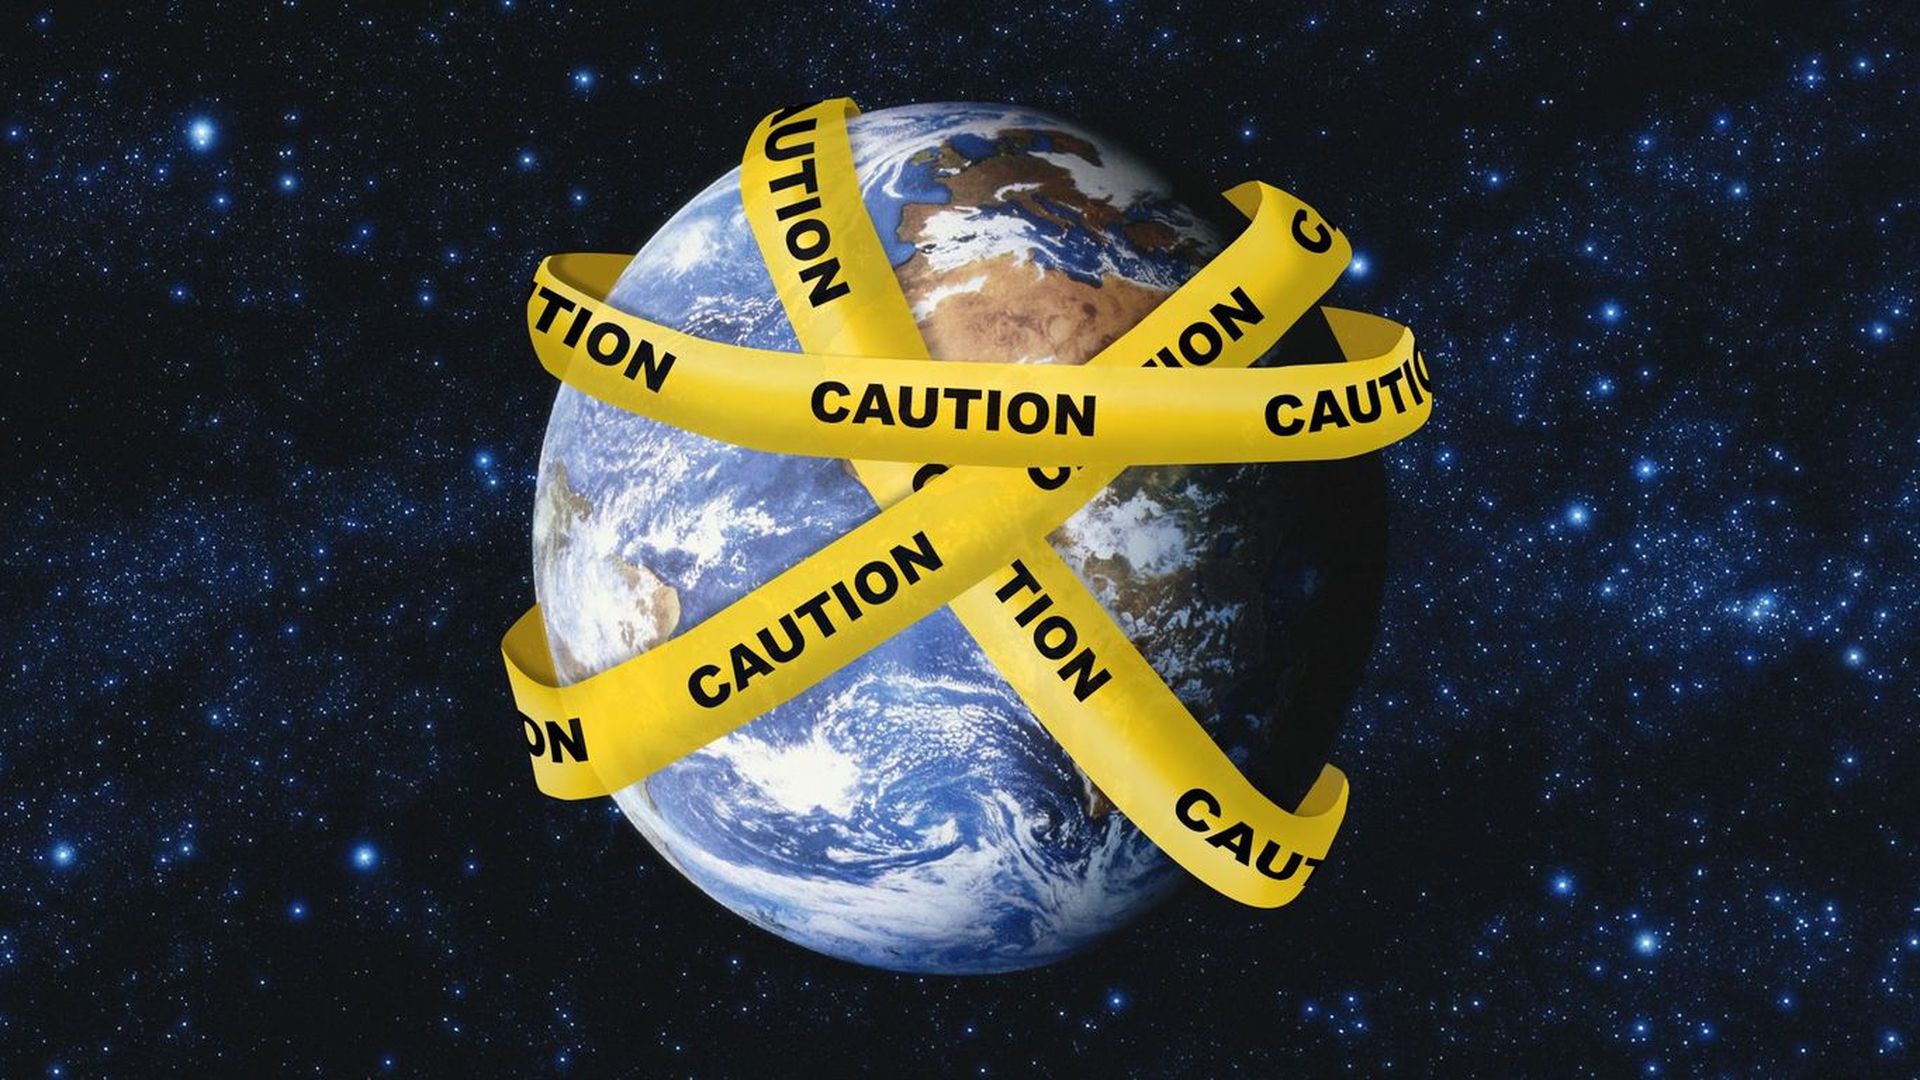 Illustration of the Earth with "caution" tape around it.